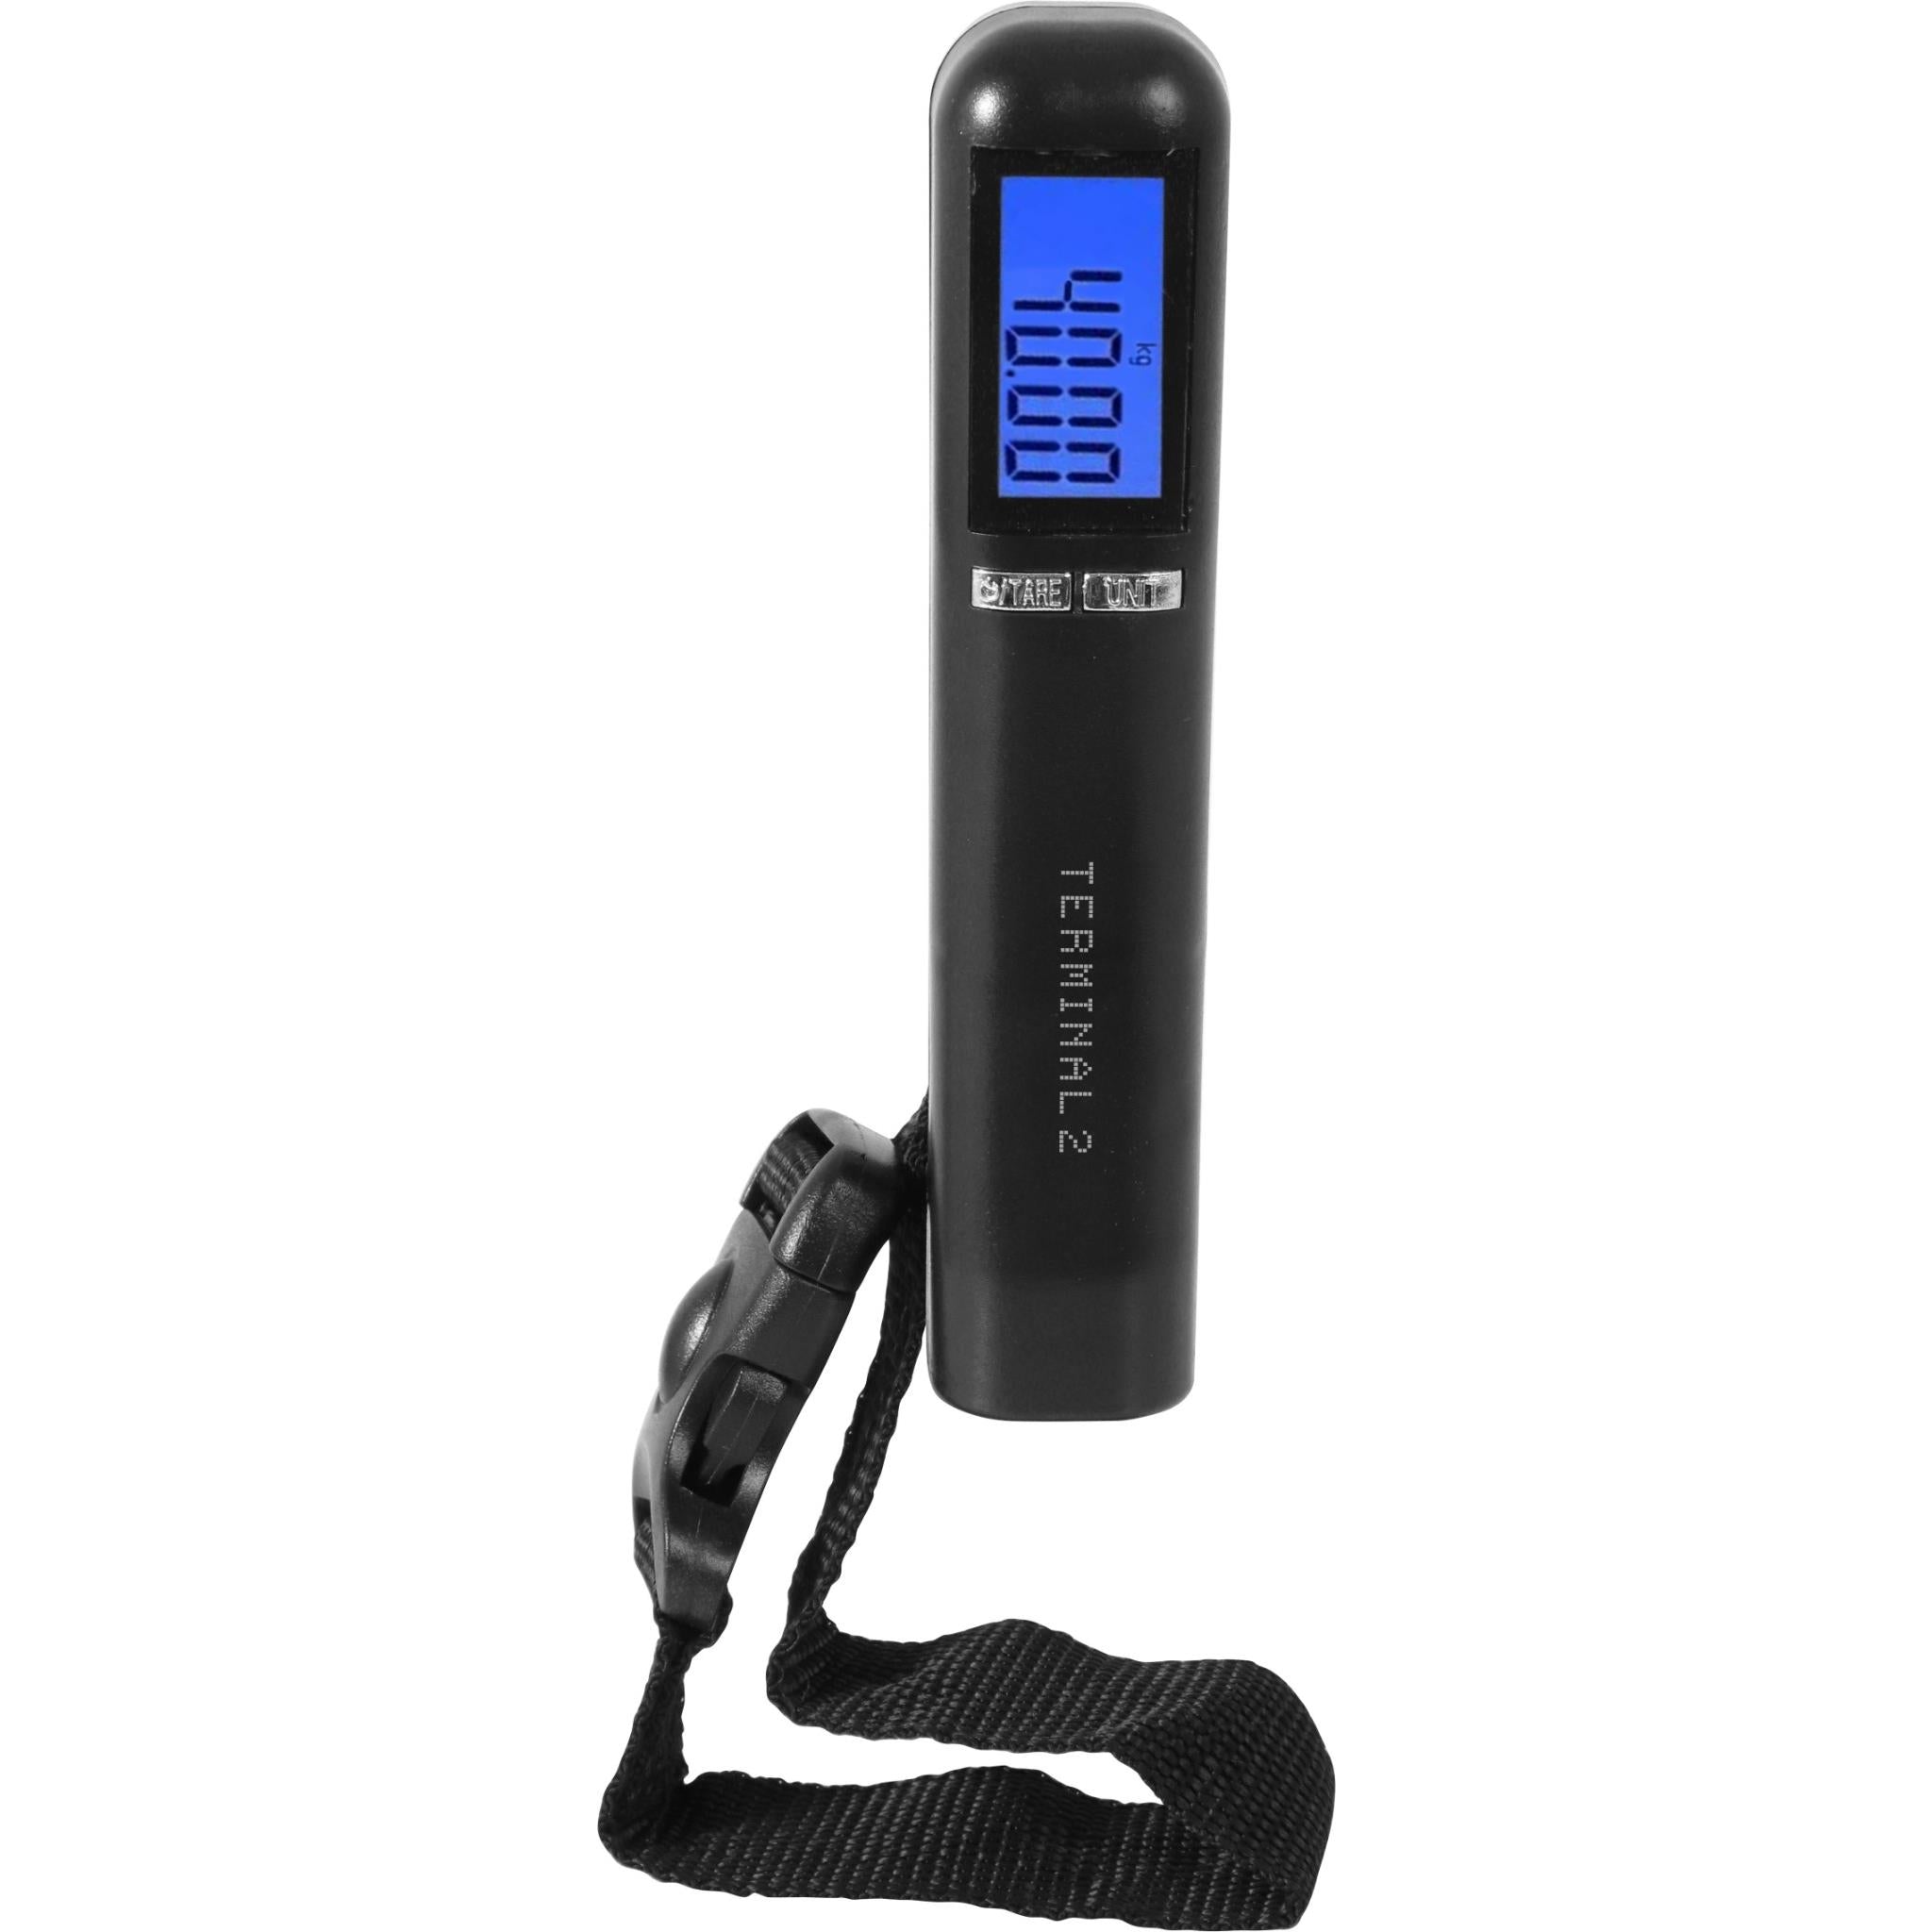 Travel Smart Compact Digital Luggage Scale - Shop Travel